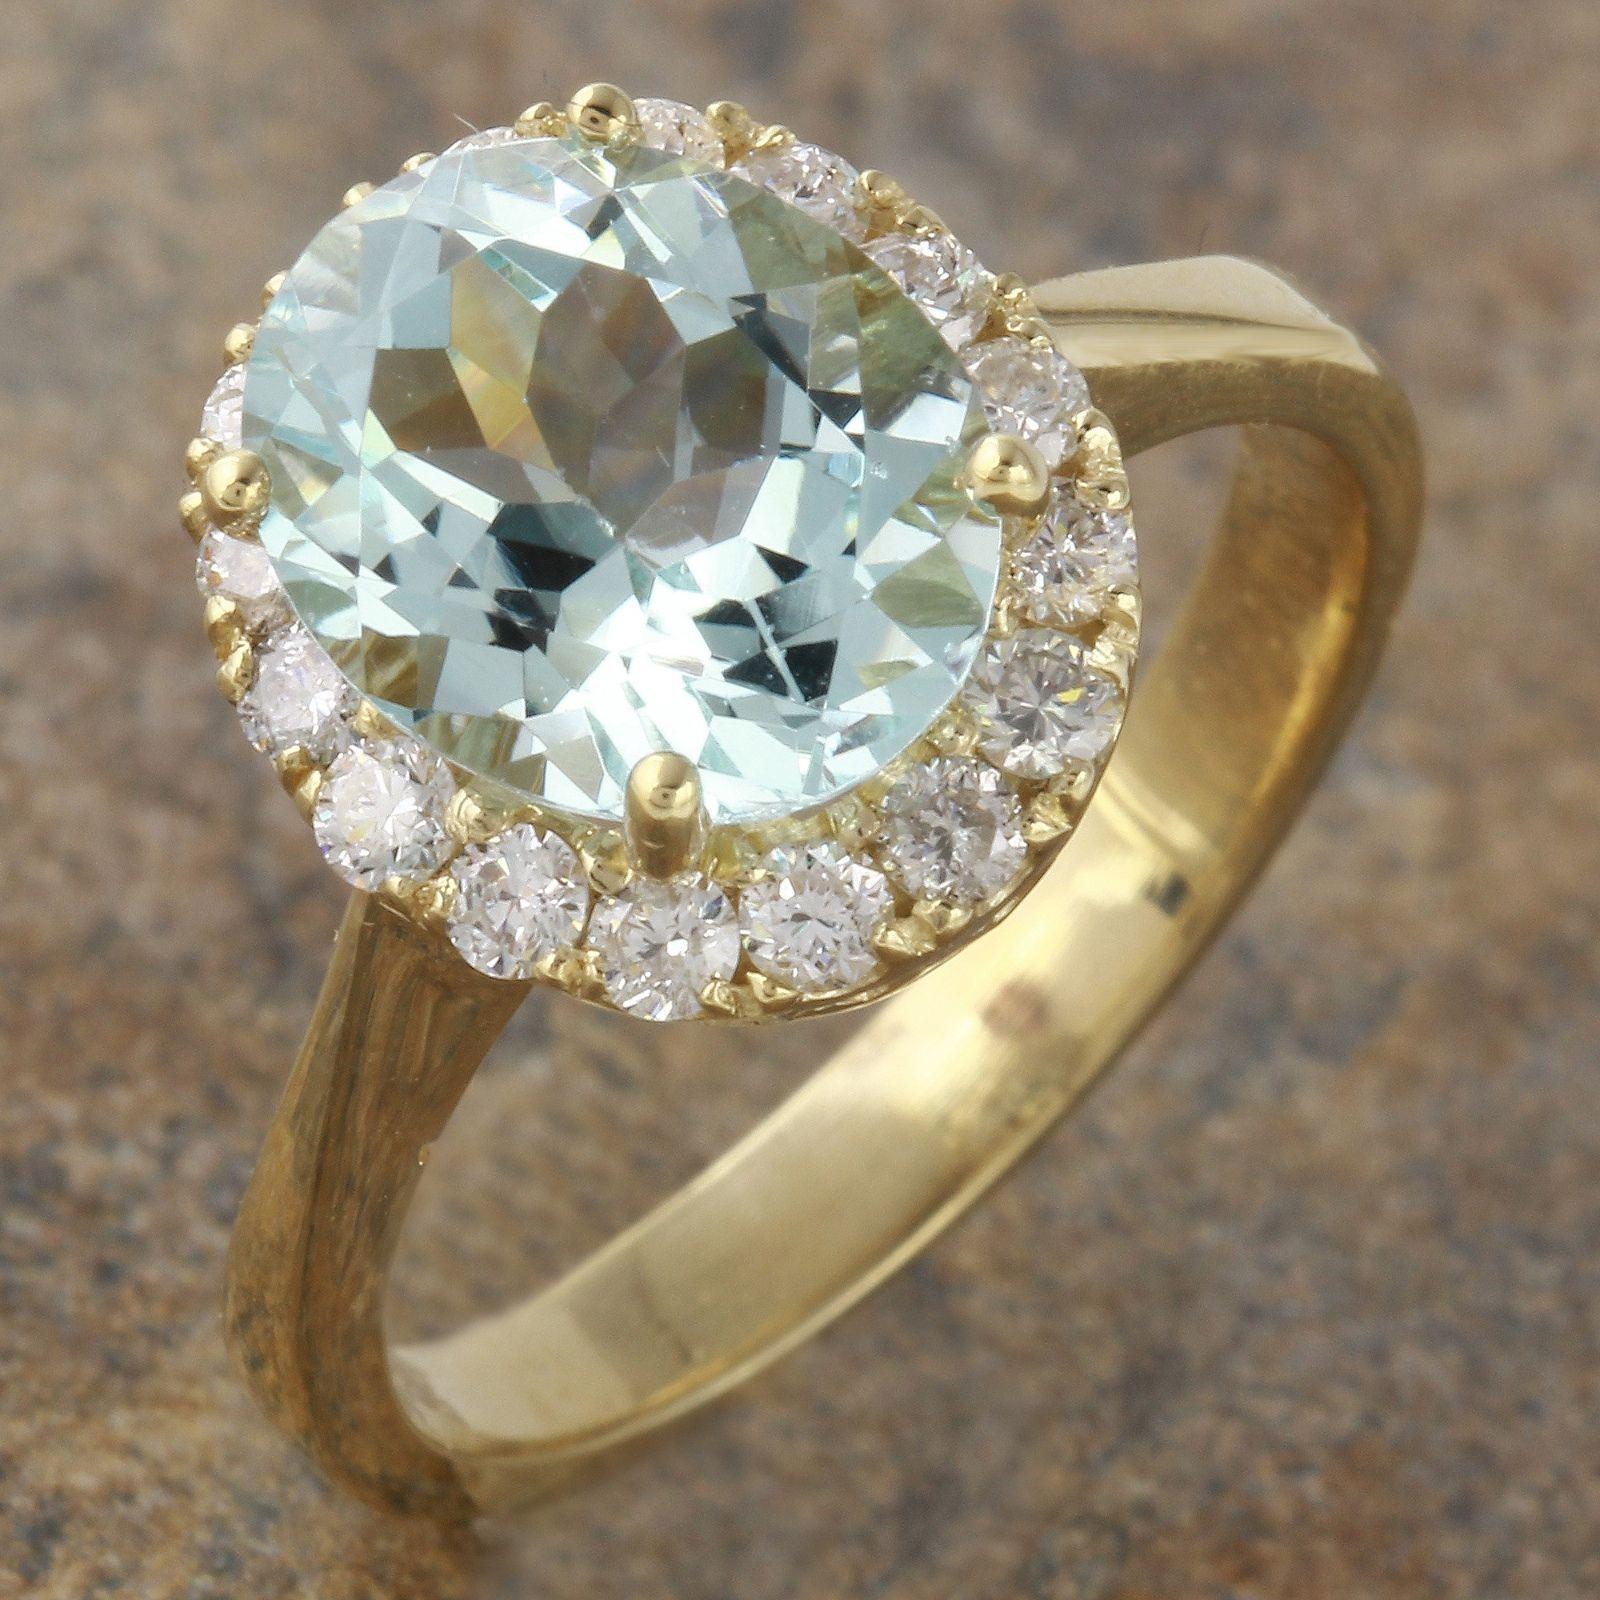 2.75 Carats Exquisite Natural Aquamarine and Diamond 14K Solid Yellow Gold Ring

Total Natural Aquamarine Weight is: 2.10 Carats (Heated)

Aquamarine Measures: 9.54 x 7.10mm

Natural Round Diamonds Weight: .65 Carats (color G-H / Clarity